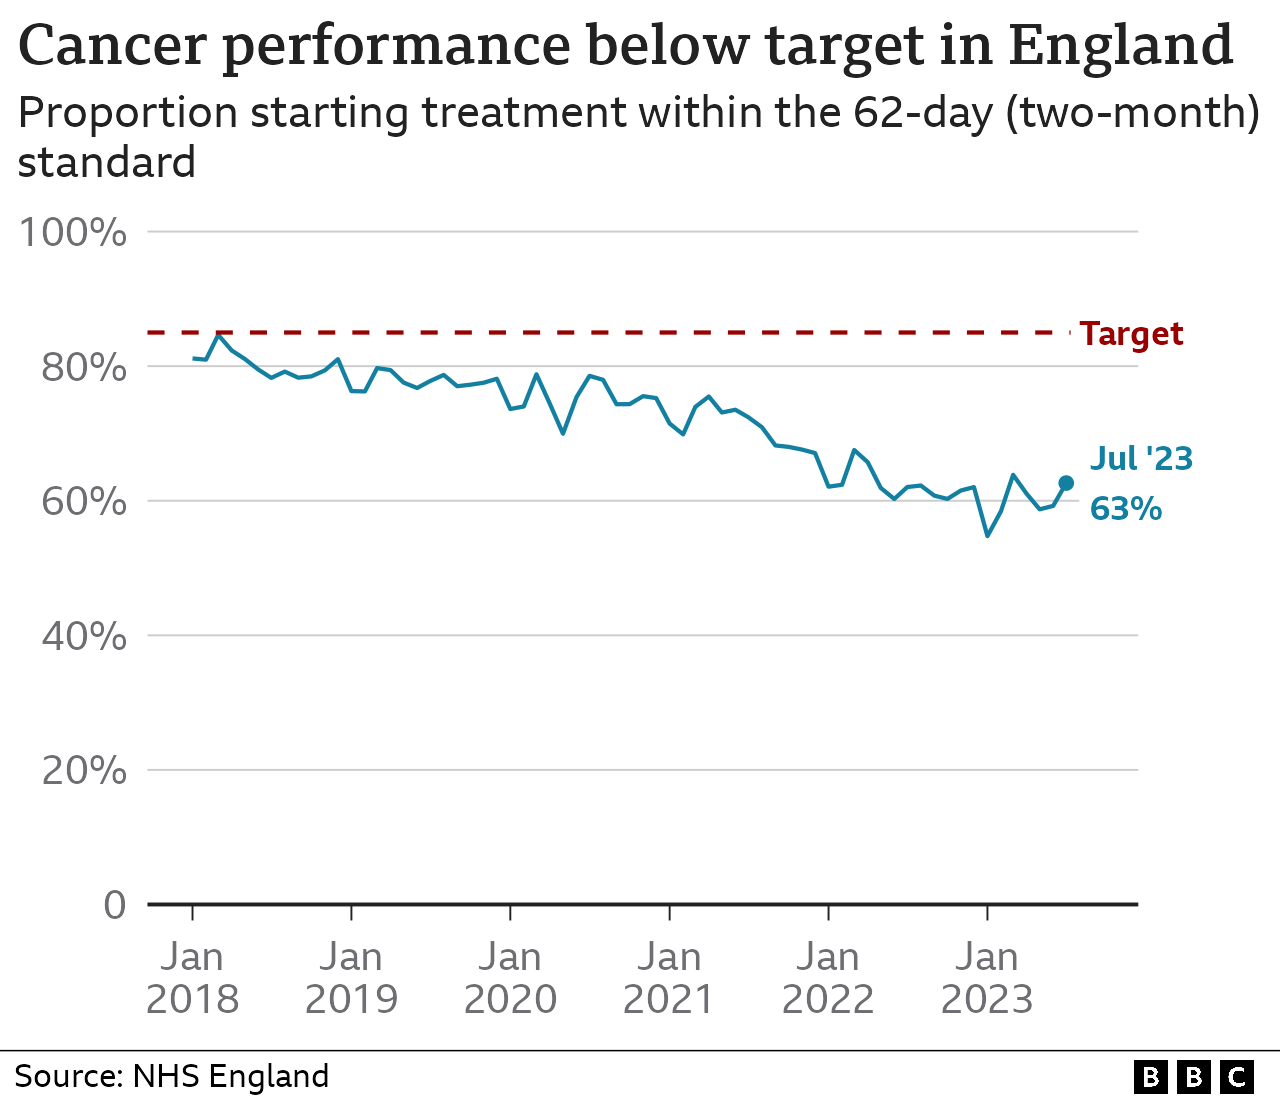 Chart showing cancer performance below target in England